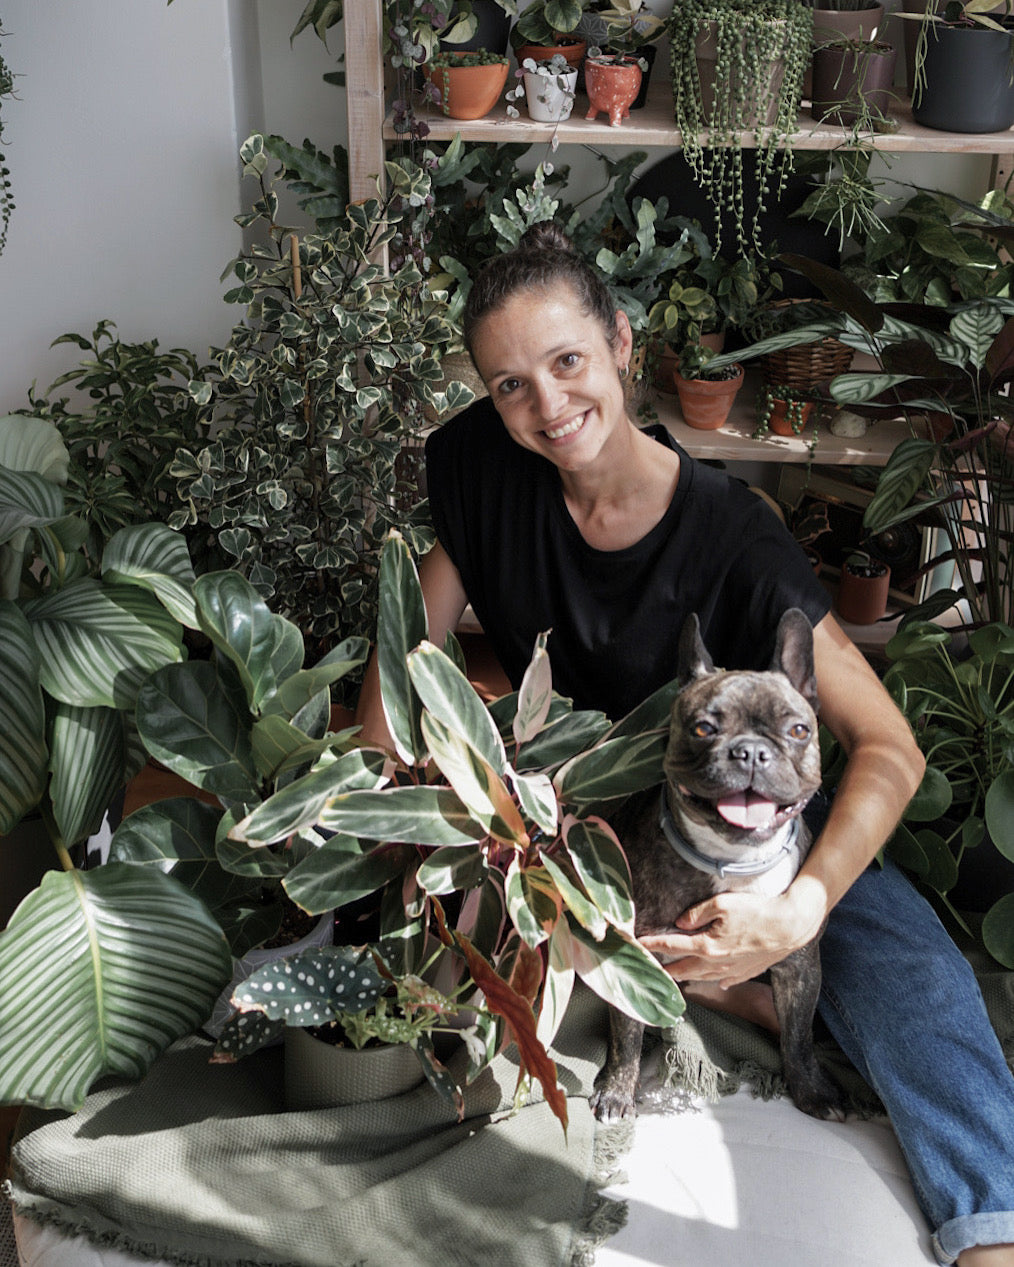 Almoinha_Ana Manuel_Is Plant Therapy a Real Thing